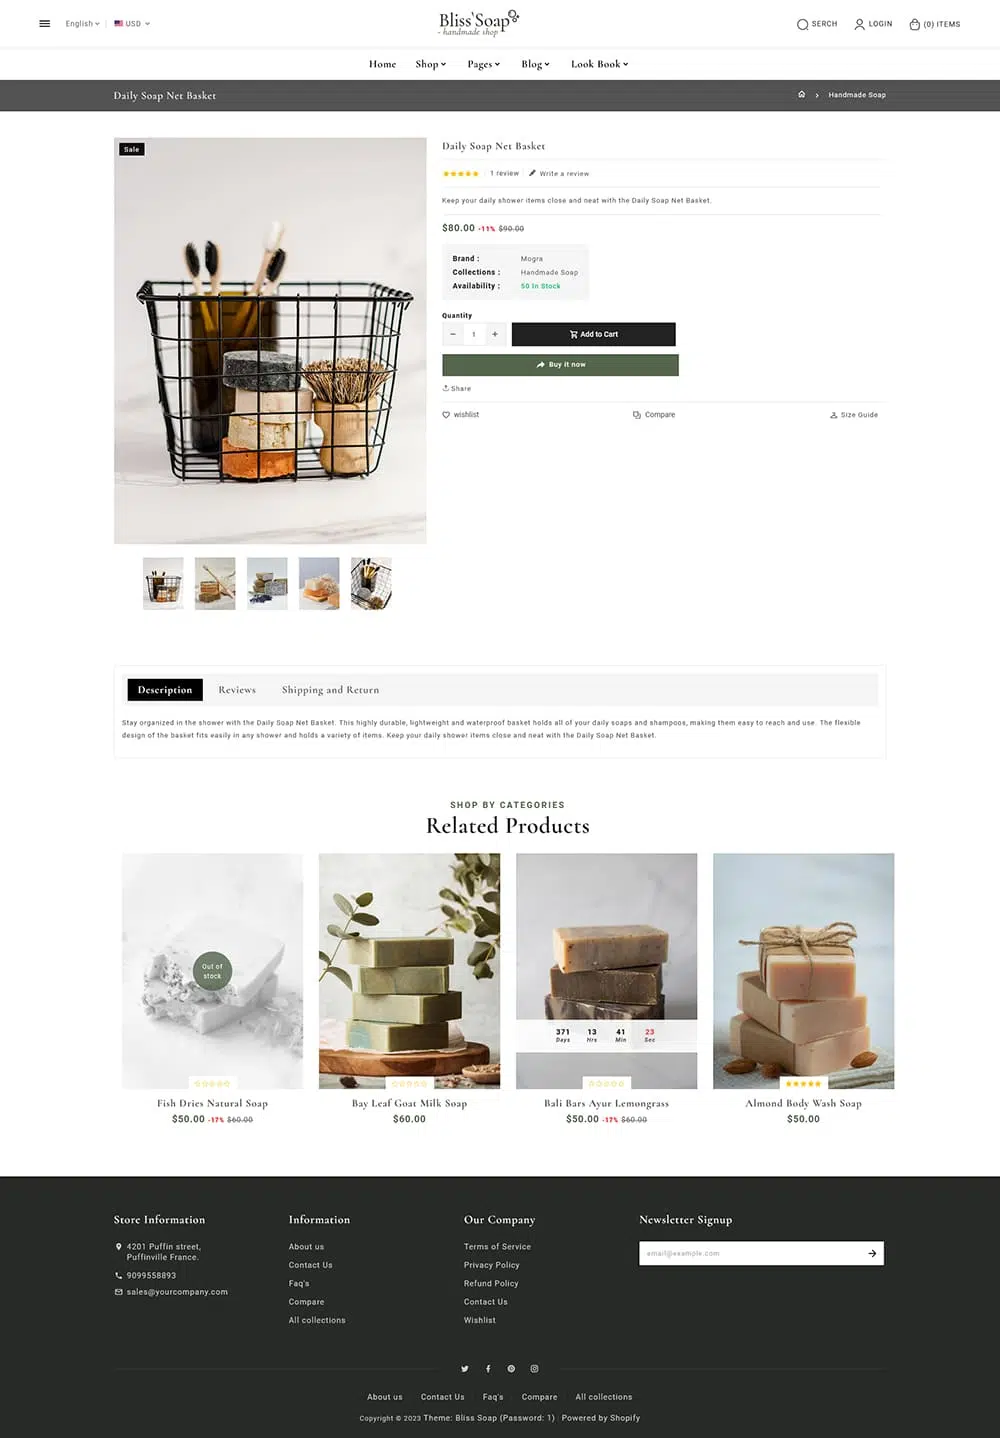 BlissSoap - Shopify Crafted theme for Handmade Soap, Soy Candle, Artistic Makers